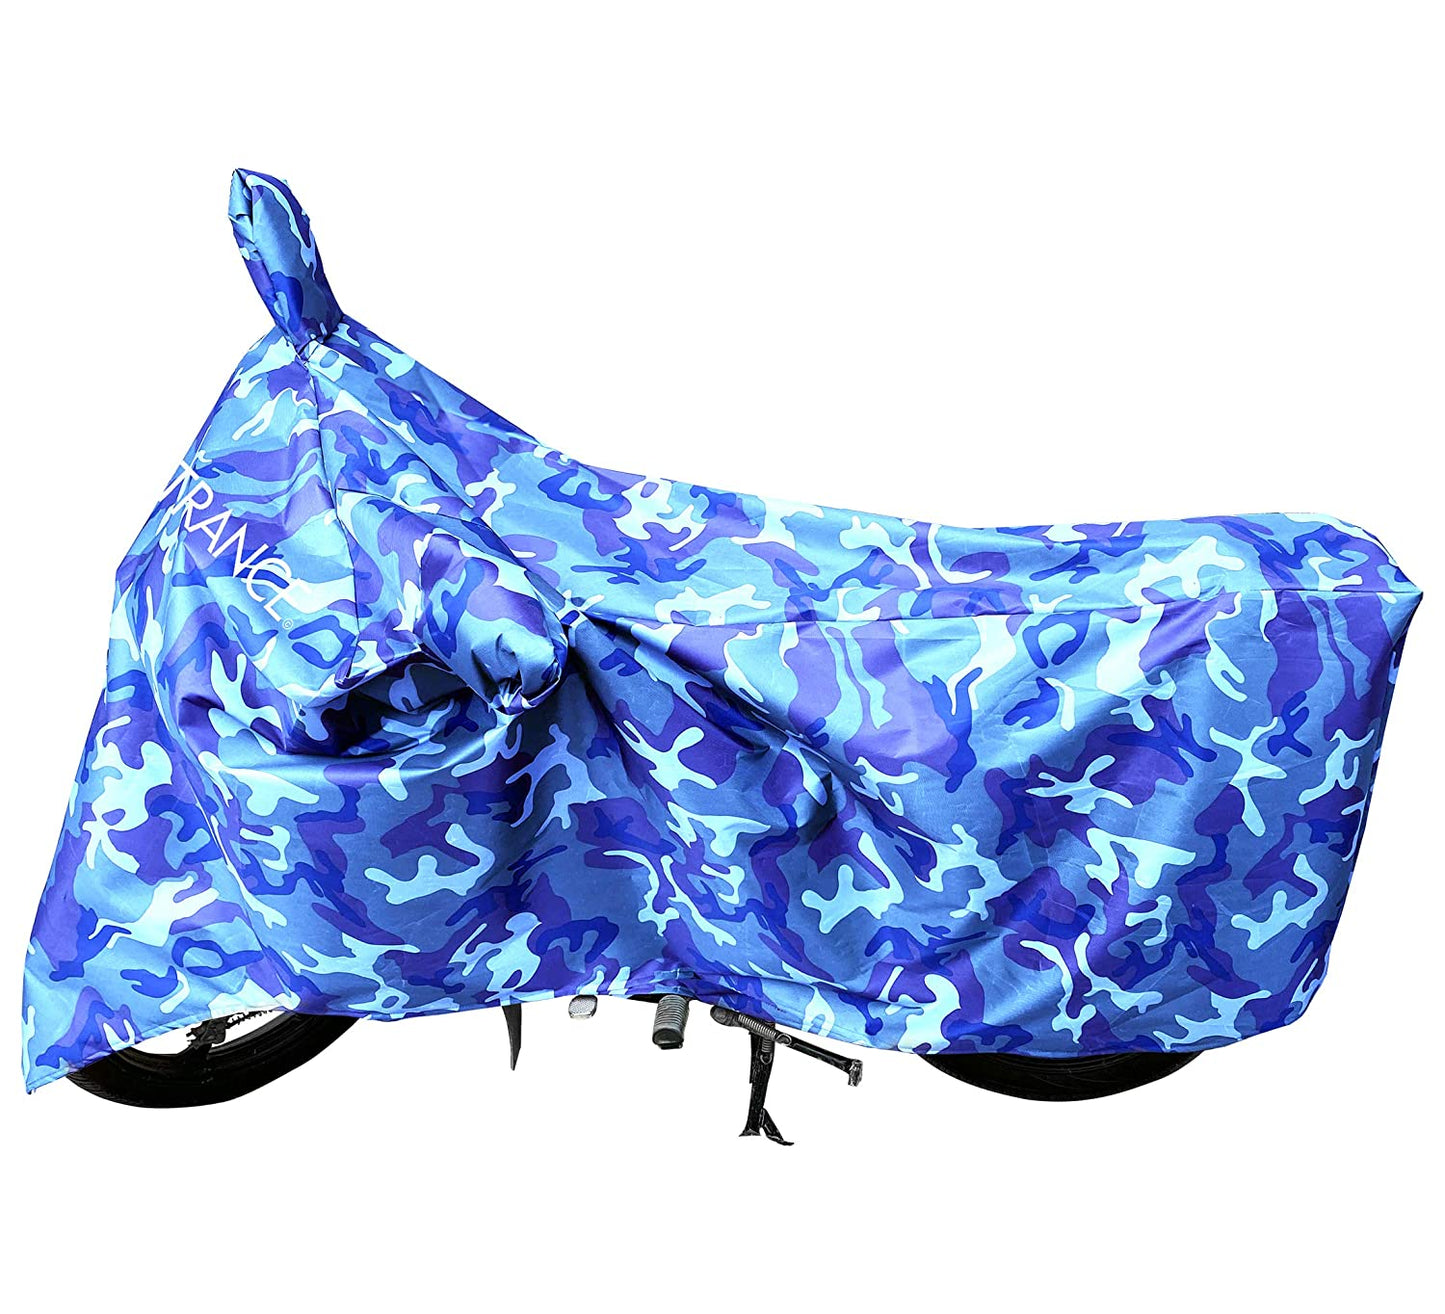 MotoTrance Jungle Bike Body Covers For Lohia Omastar - Interlock-Stitched Waterproof and Heat Resistant with Mirror Pockets